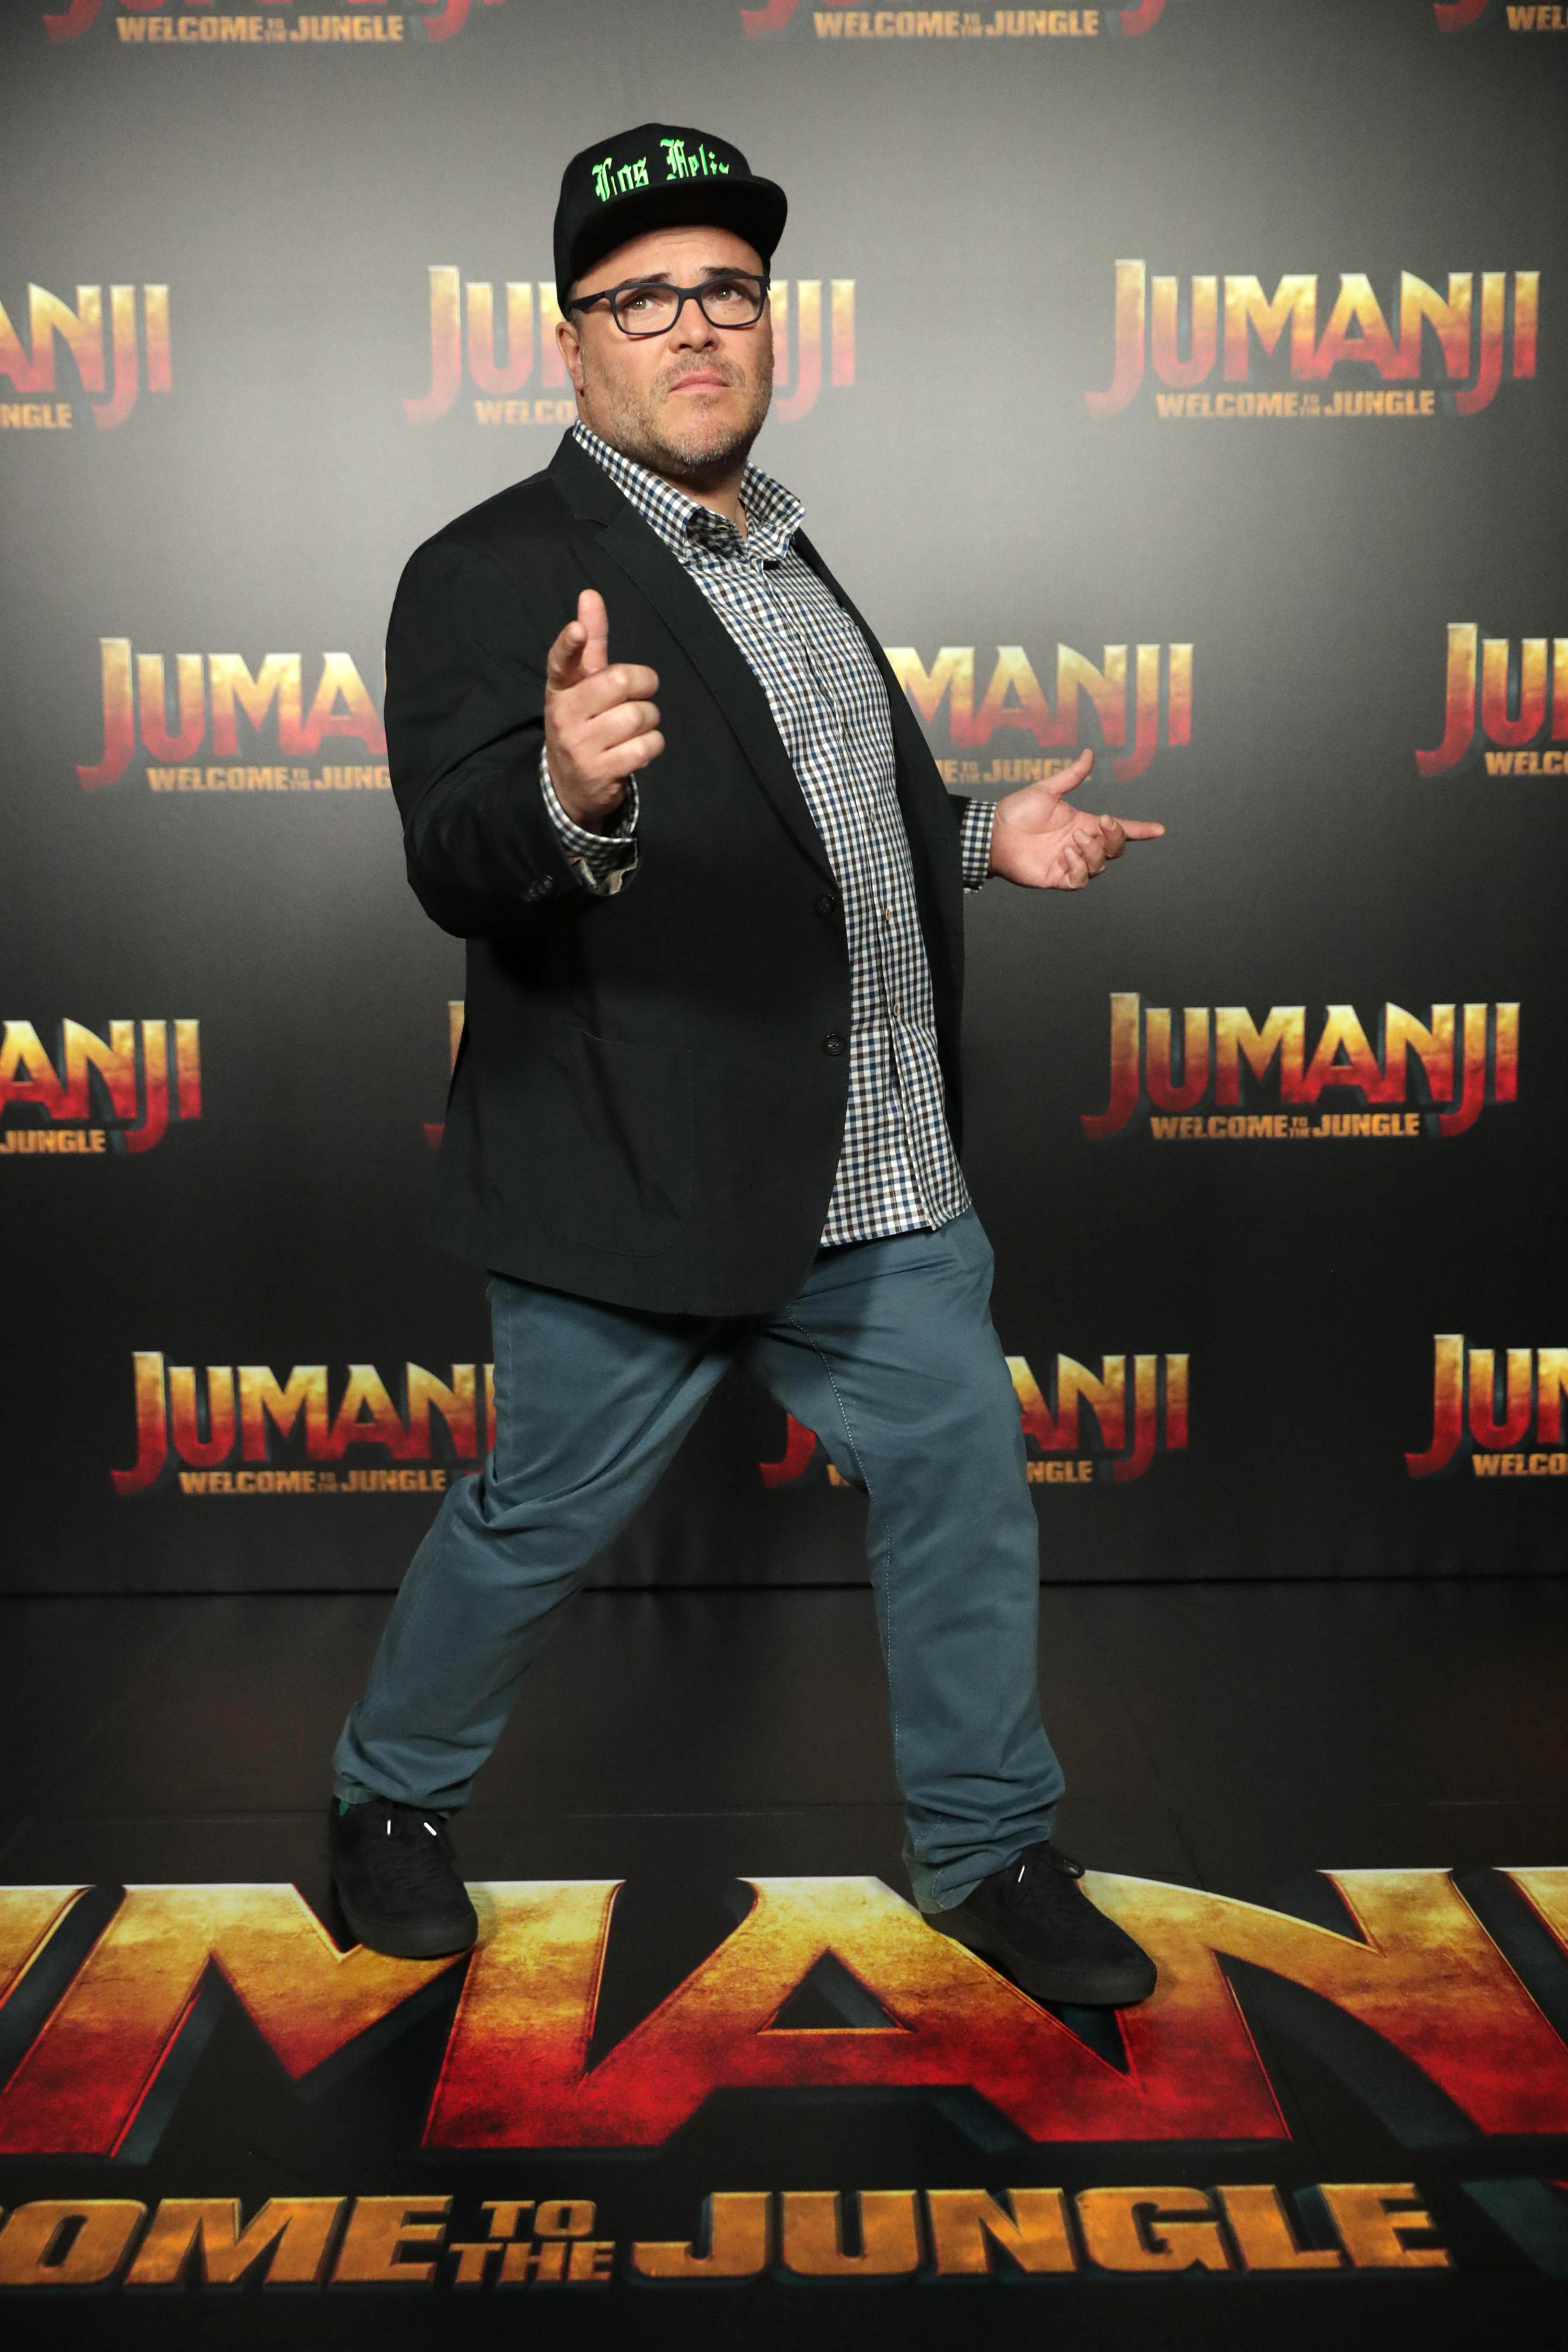 Jack Black seen at Columbia Pictures 'Jumanji: Welcome to the Jungle' photo call at 2017 CinemaCon on Monday, March 27, 2017, in Las Vegas.